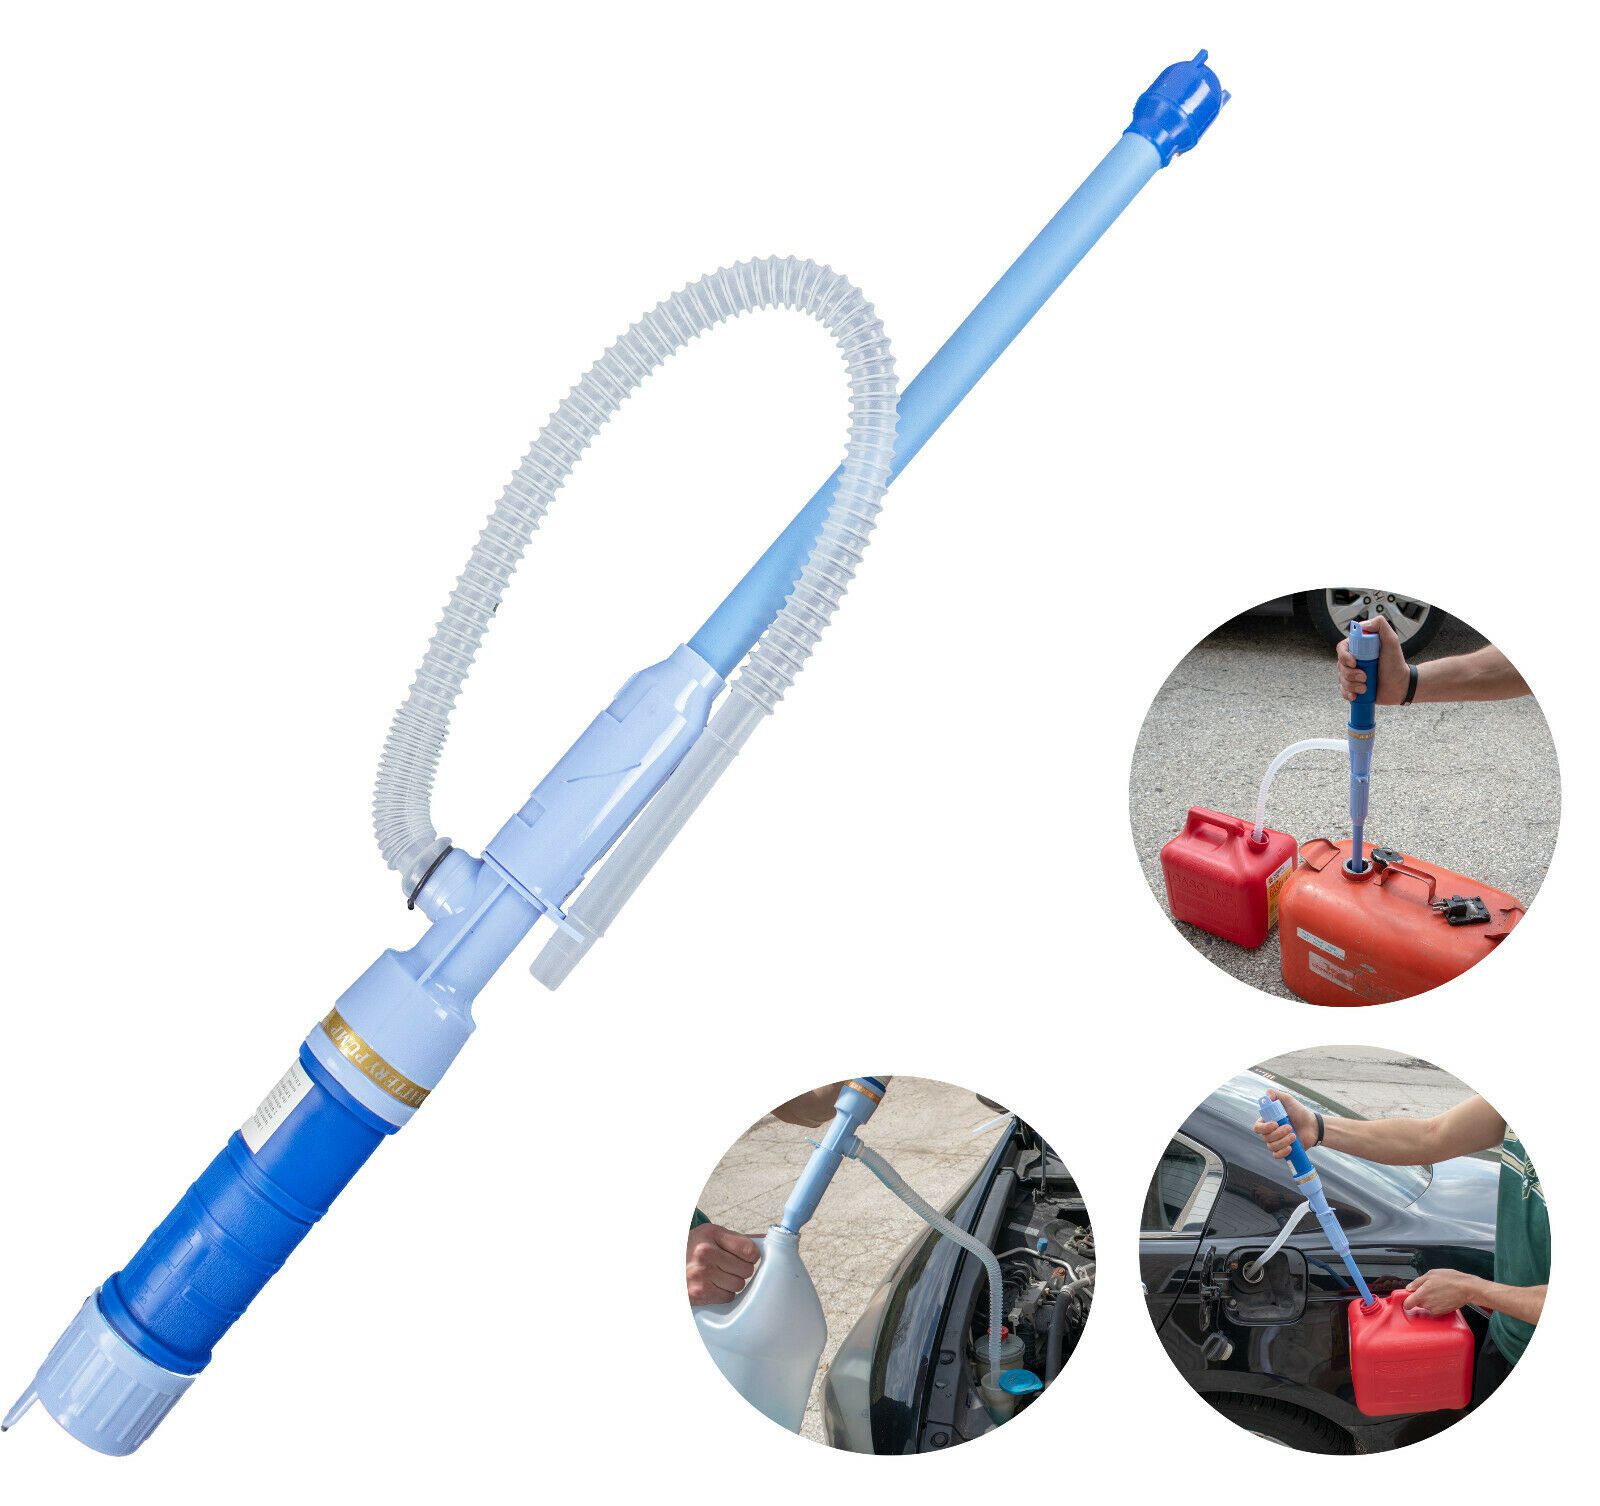 PowerFlow Auto Pump - Battery-Powered Liquid Transfer Tool for Cars & Outdoors